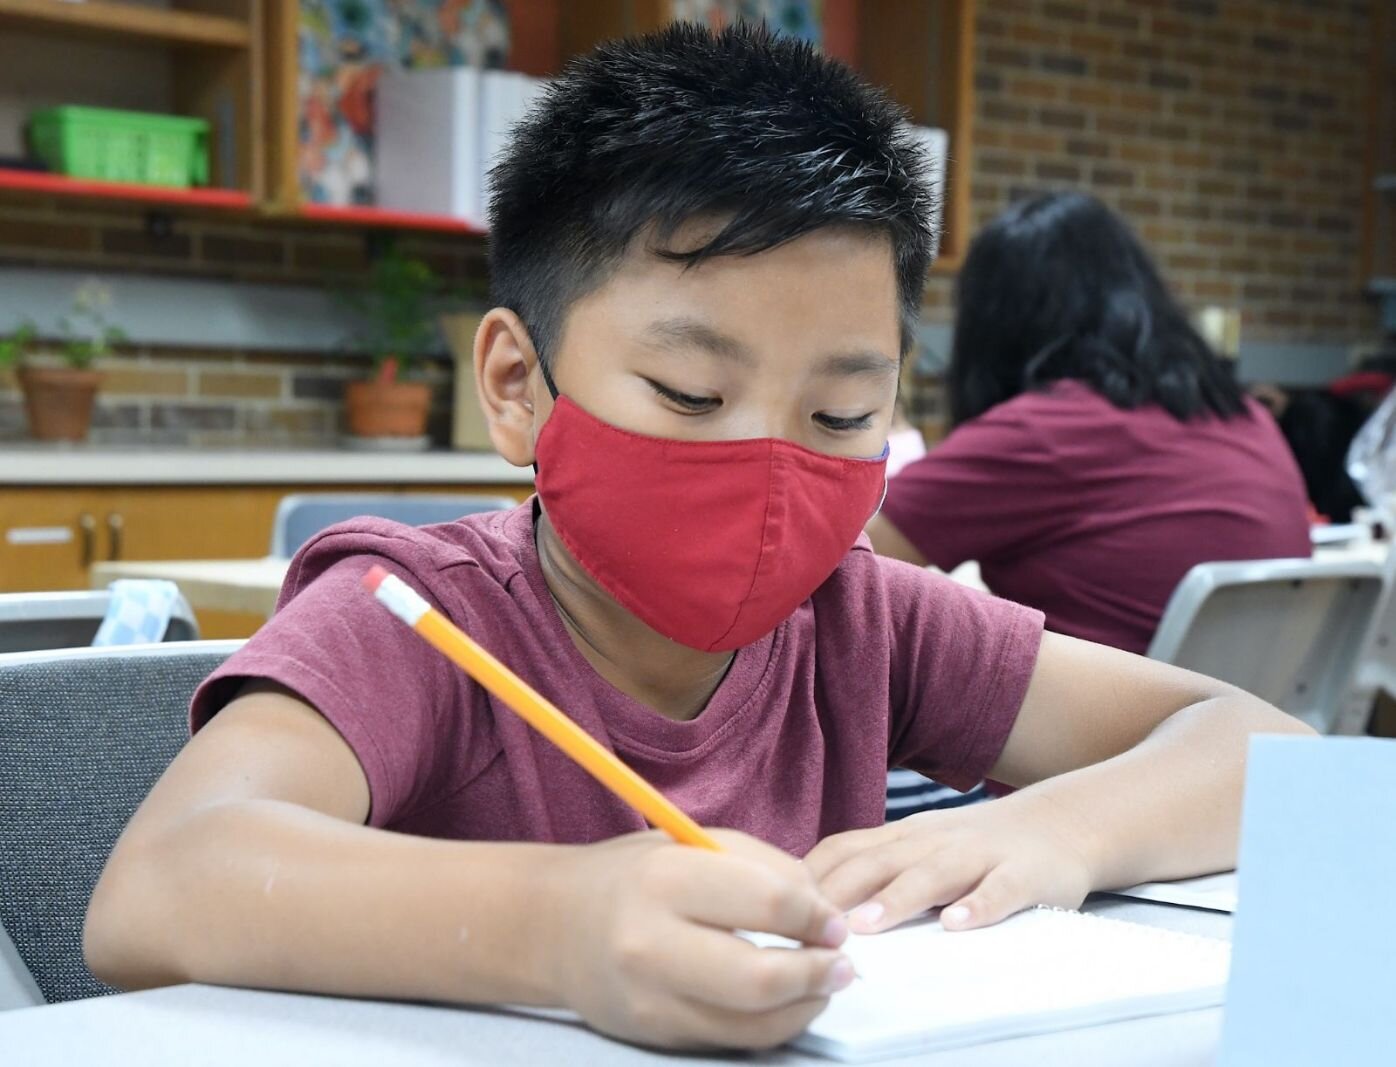 Joshua Bawi, 9, concentrates on a summer school session at the Burma Center.